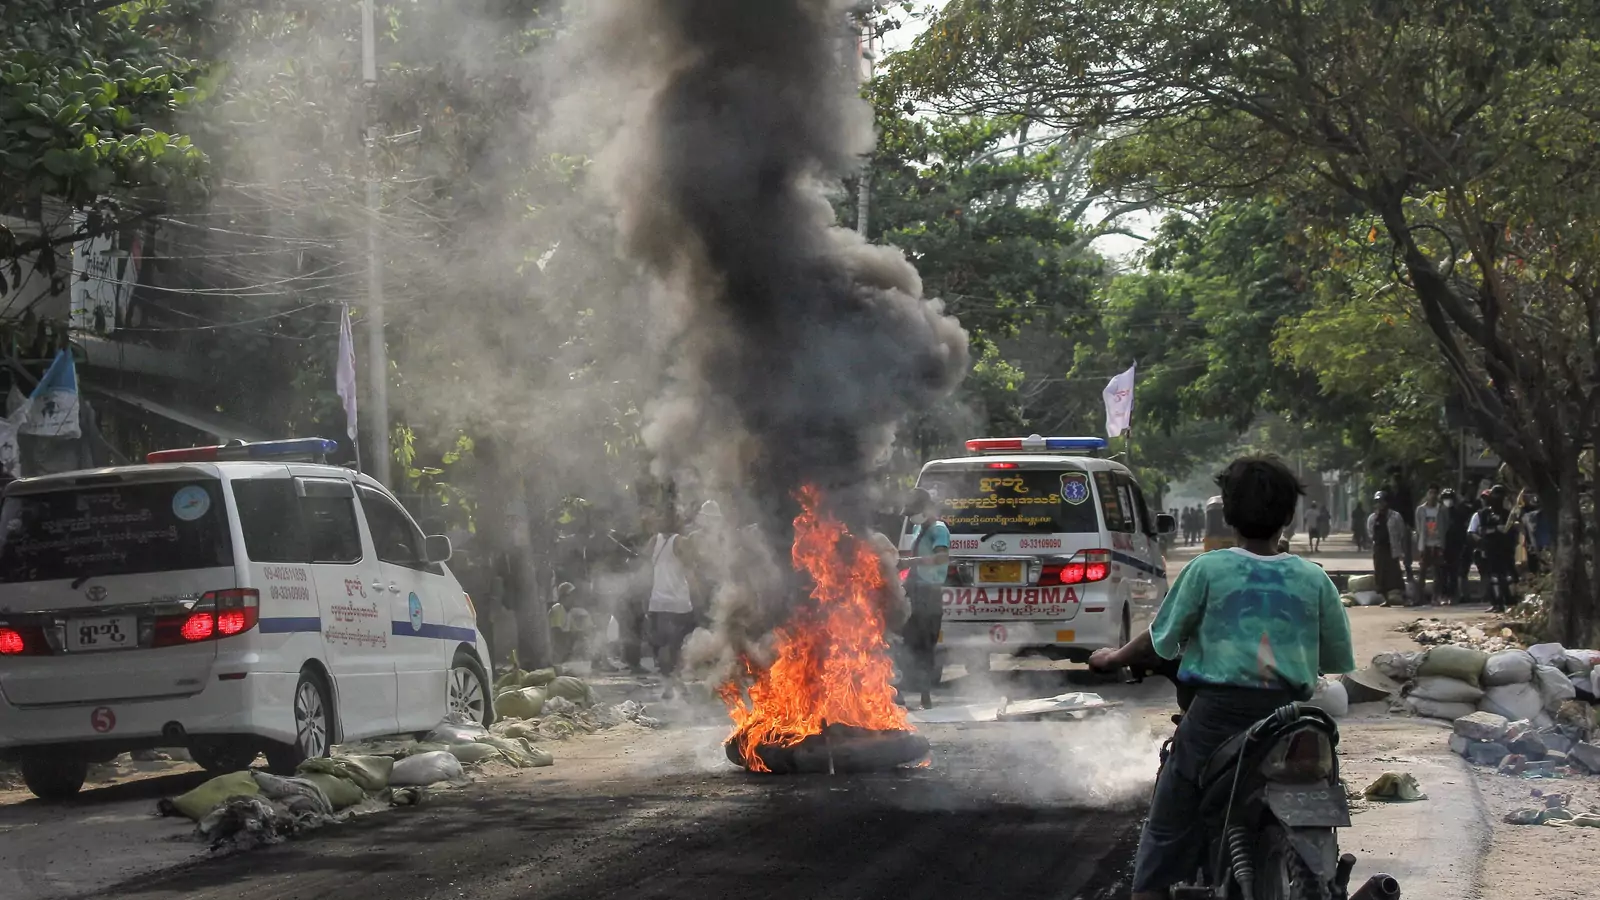 A fire burns on the street during a protest against the military coup, in Mandalay, Myanmar on April 1, 2021.